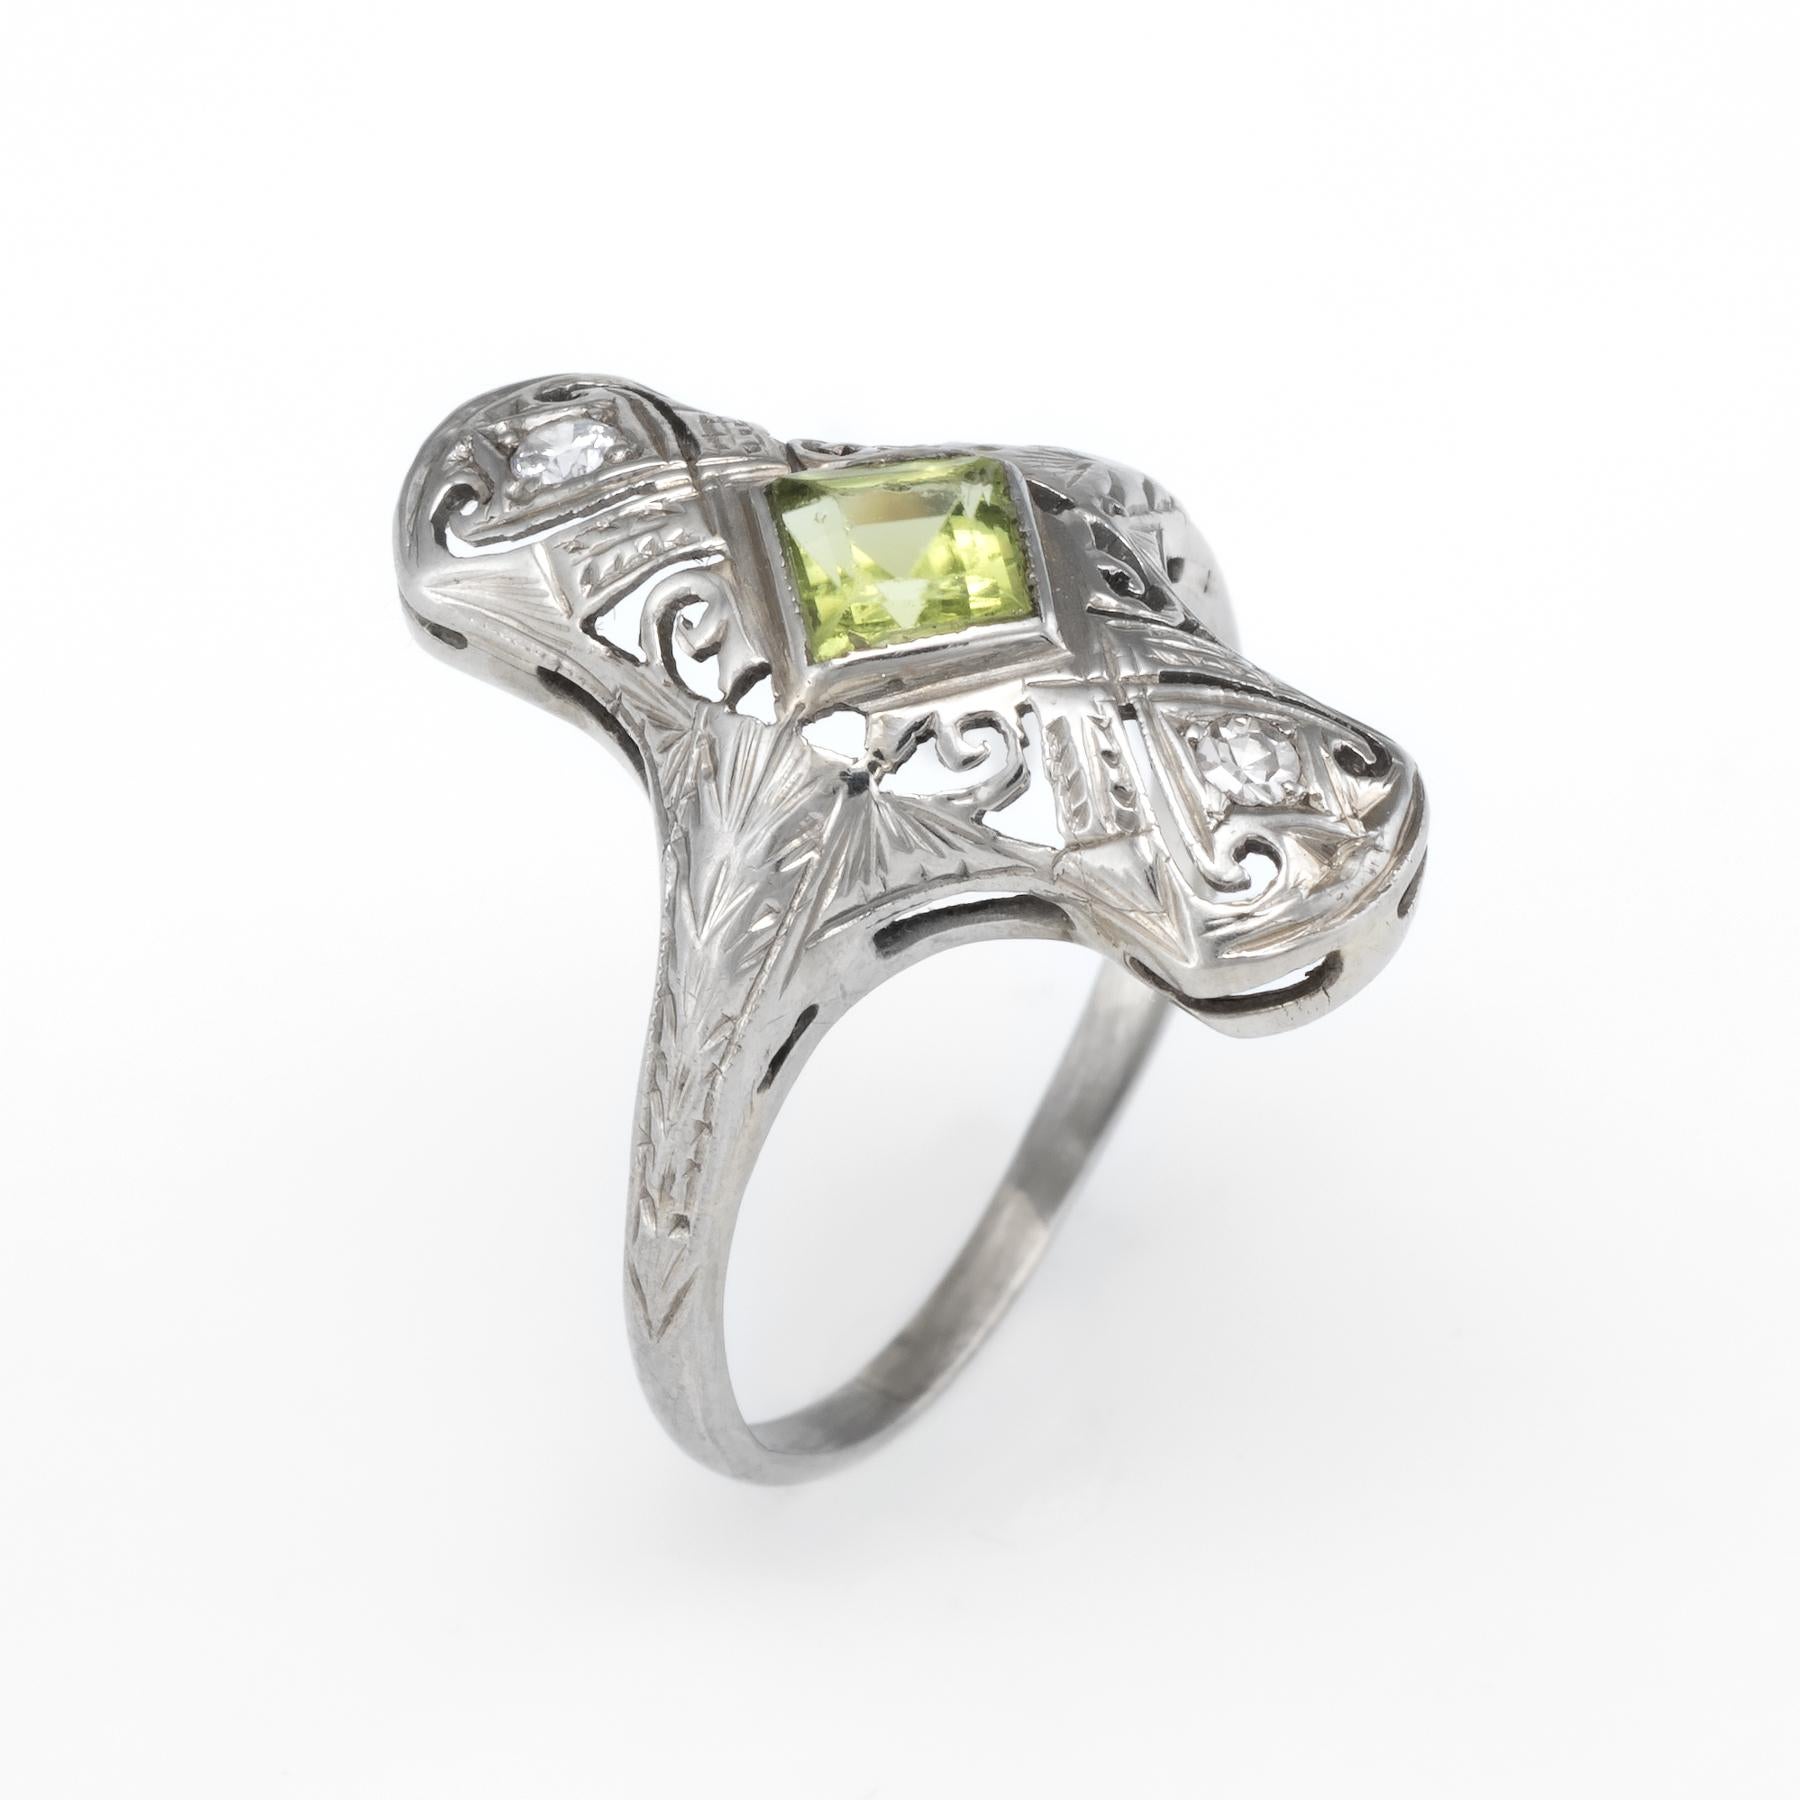 Finely detailed vintage Art Deco era ring (circa 1920s to 1930s), crafted in 14 karat white gold. 

Centrally mounted estimated 0.80 carat peridot is accented with two estimated 0.02 carat diamonds (0.04 carats total estimated weight - estimated at